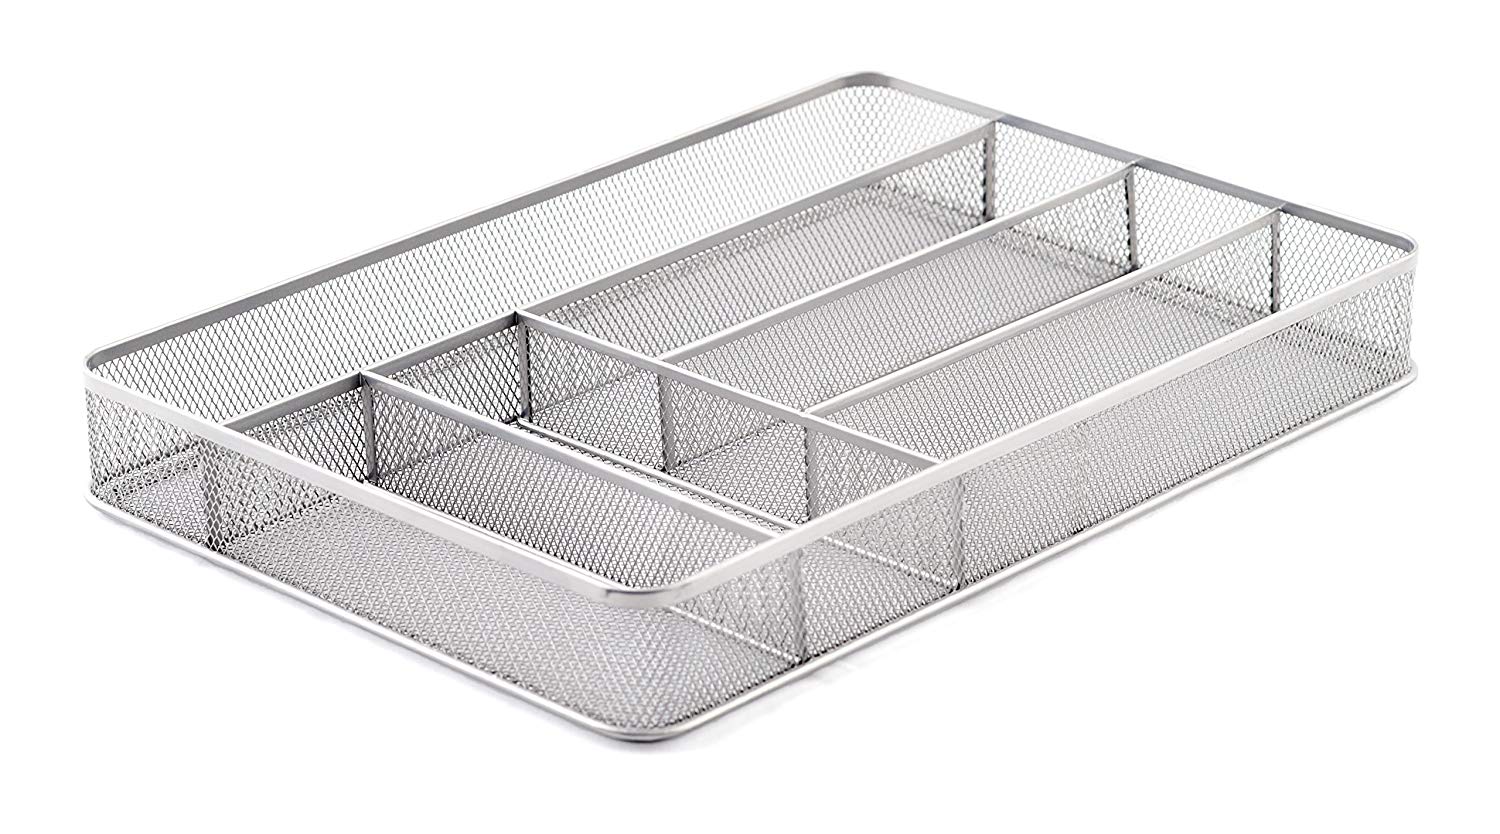 KD Organizers 6-Slot Large Mesh Drawer Organizer: Use as kitchen silverware or cutlery tray, desk drawer dividers for office supplies, bathroom accessories holder and more!